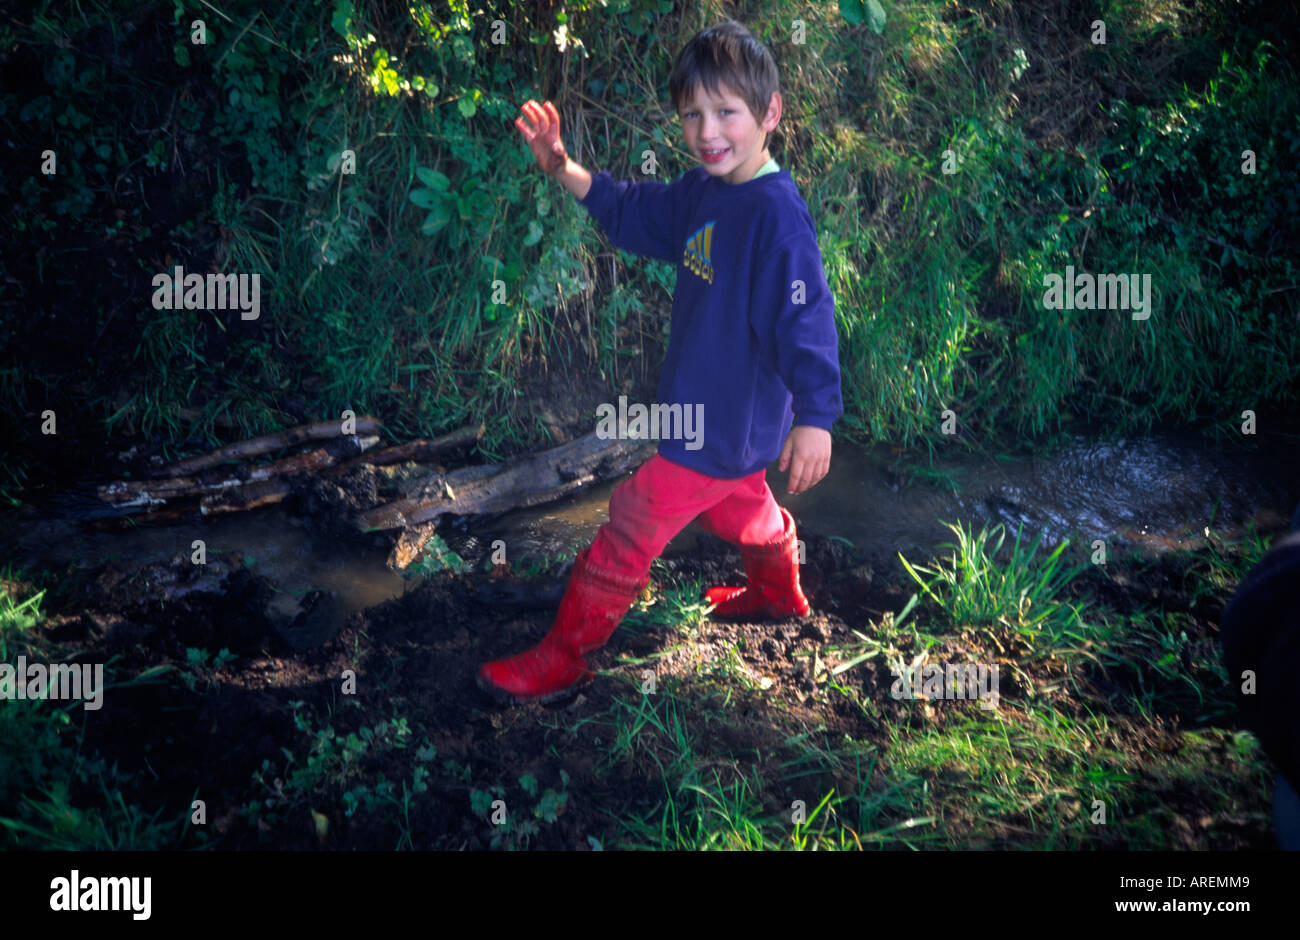 Young boy wearing red wellington boots 